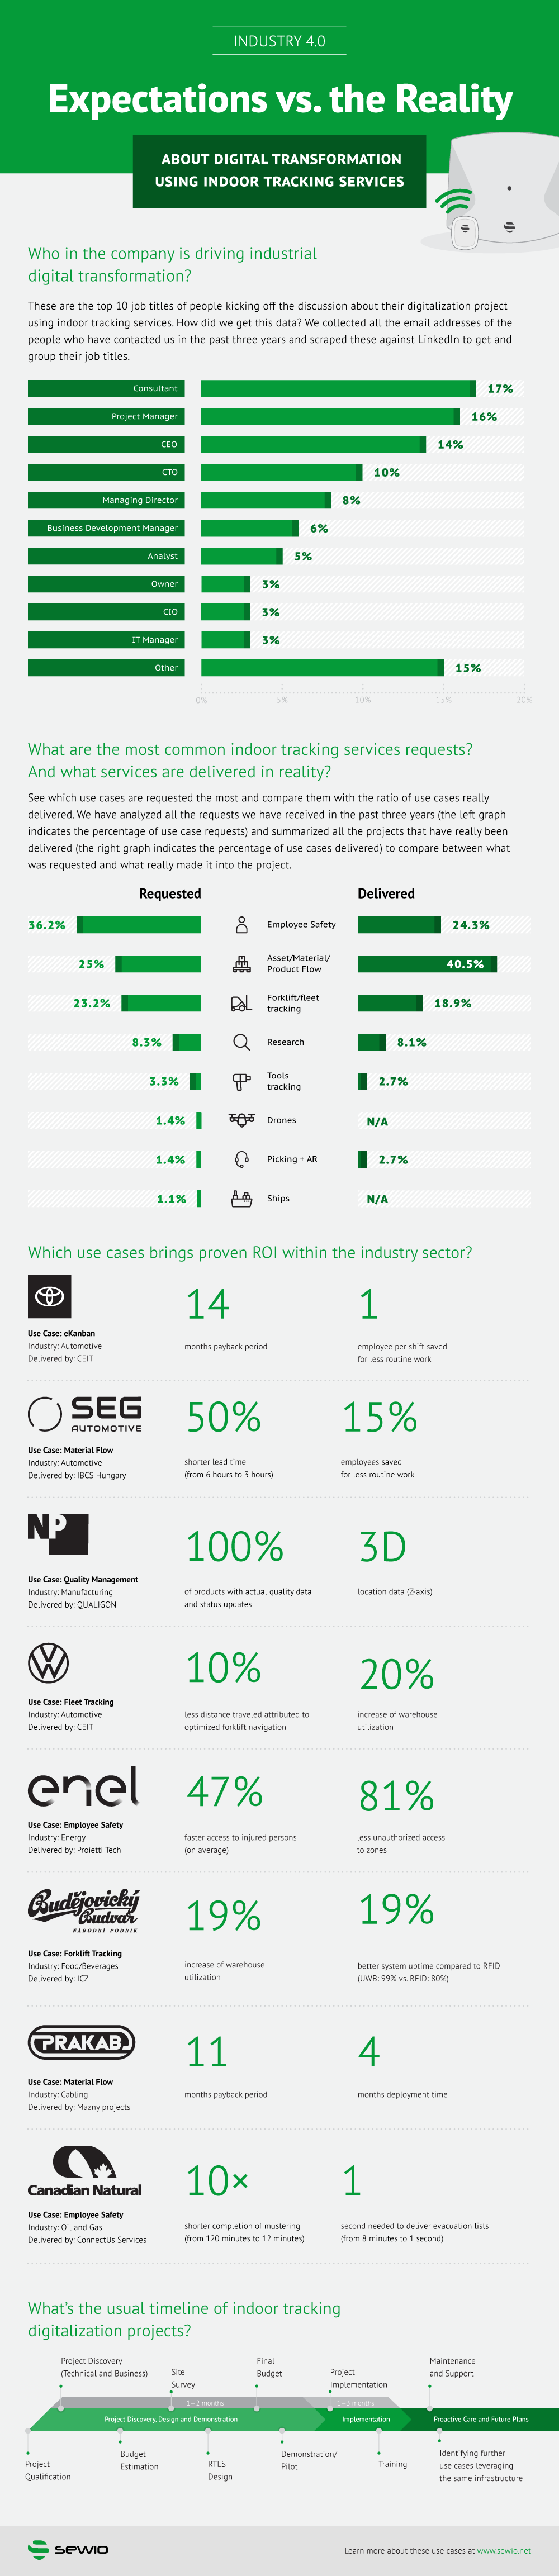 Infographic Industry 4.0 Expectations Vs. Reality About Digital Transformation In Industry, Industry Today